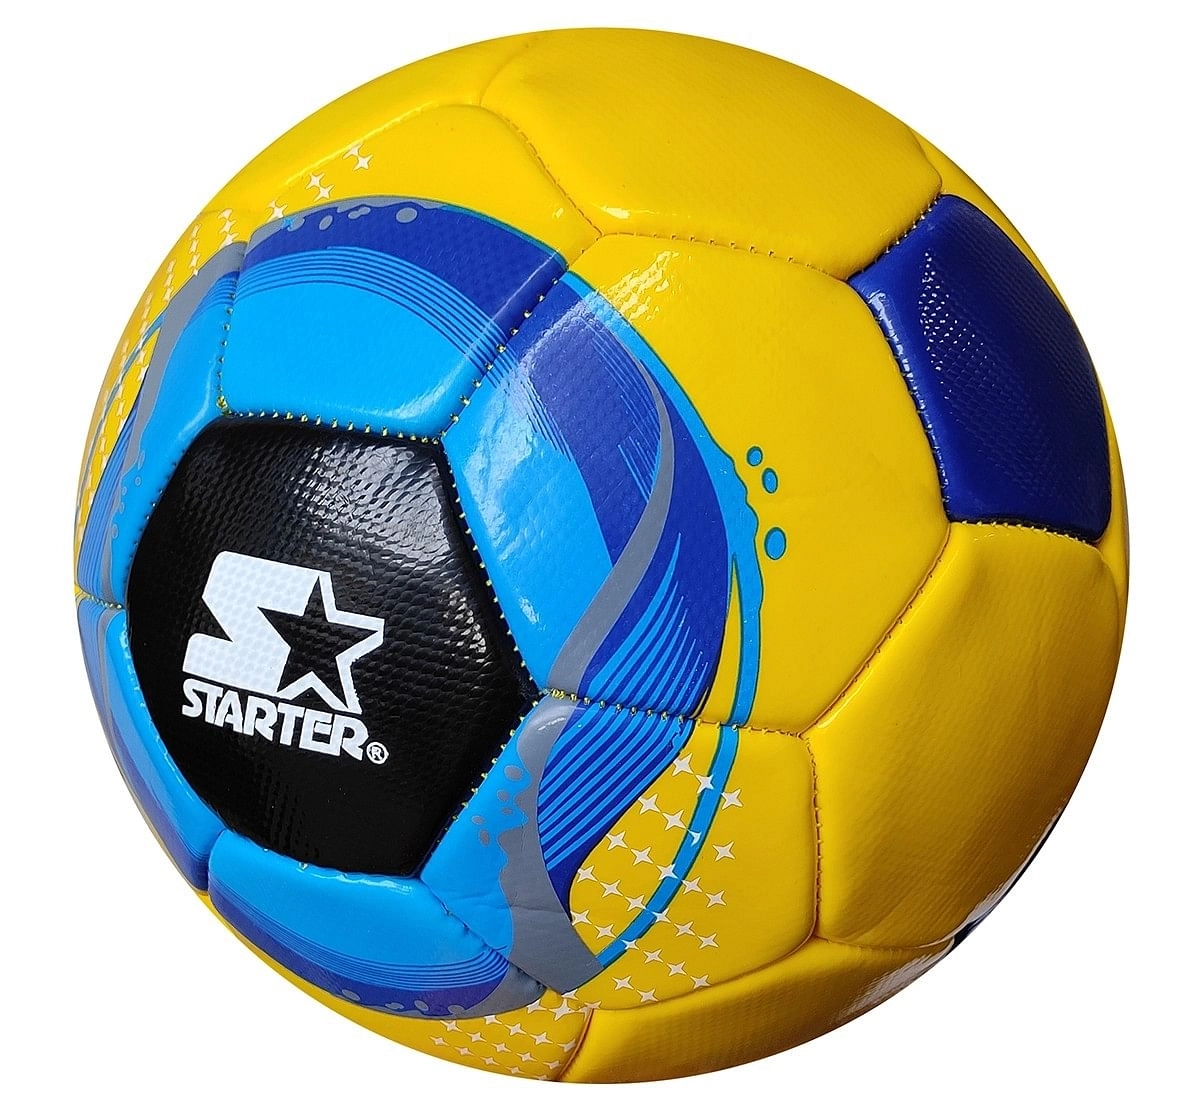 Starter Football size 5 Yellow 8Y+